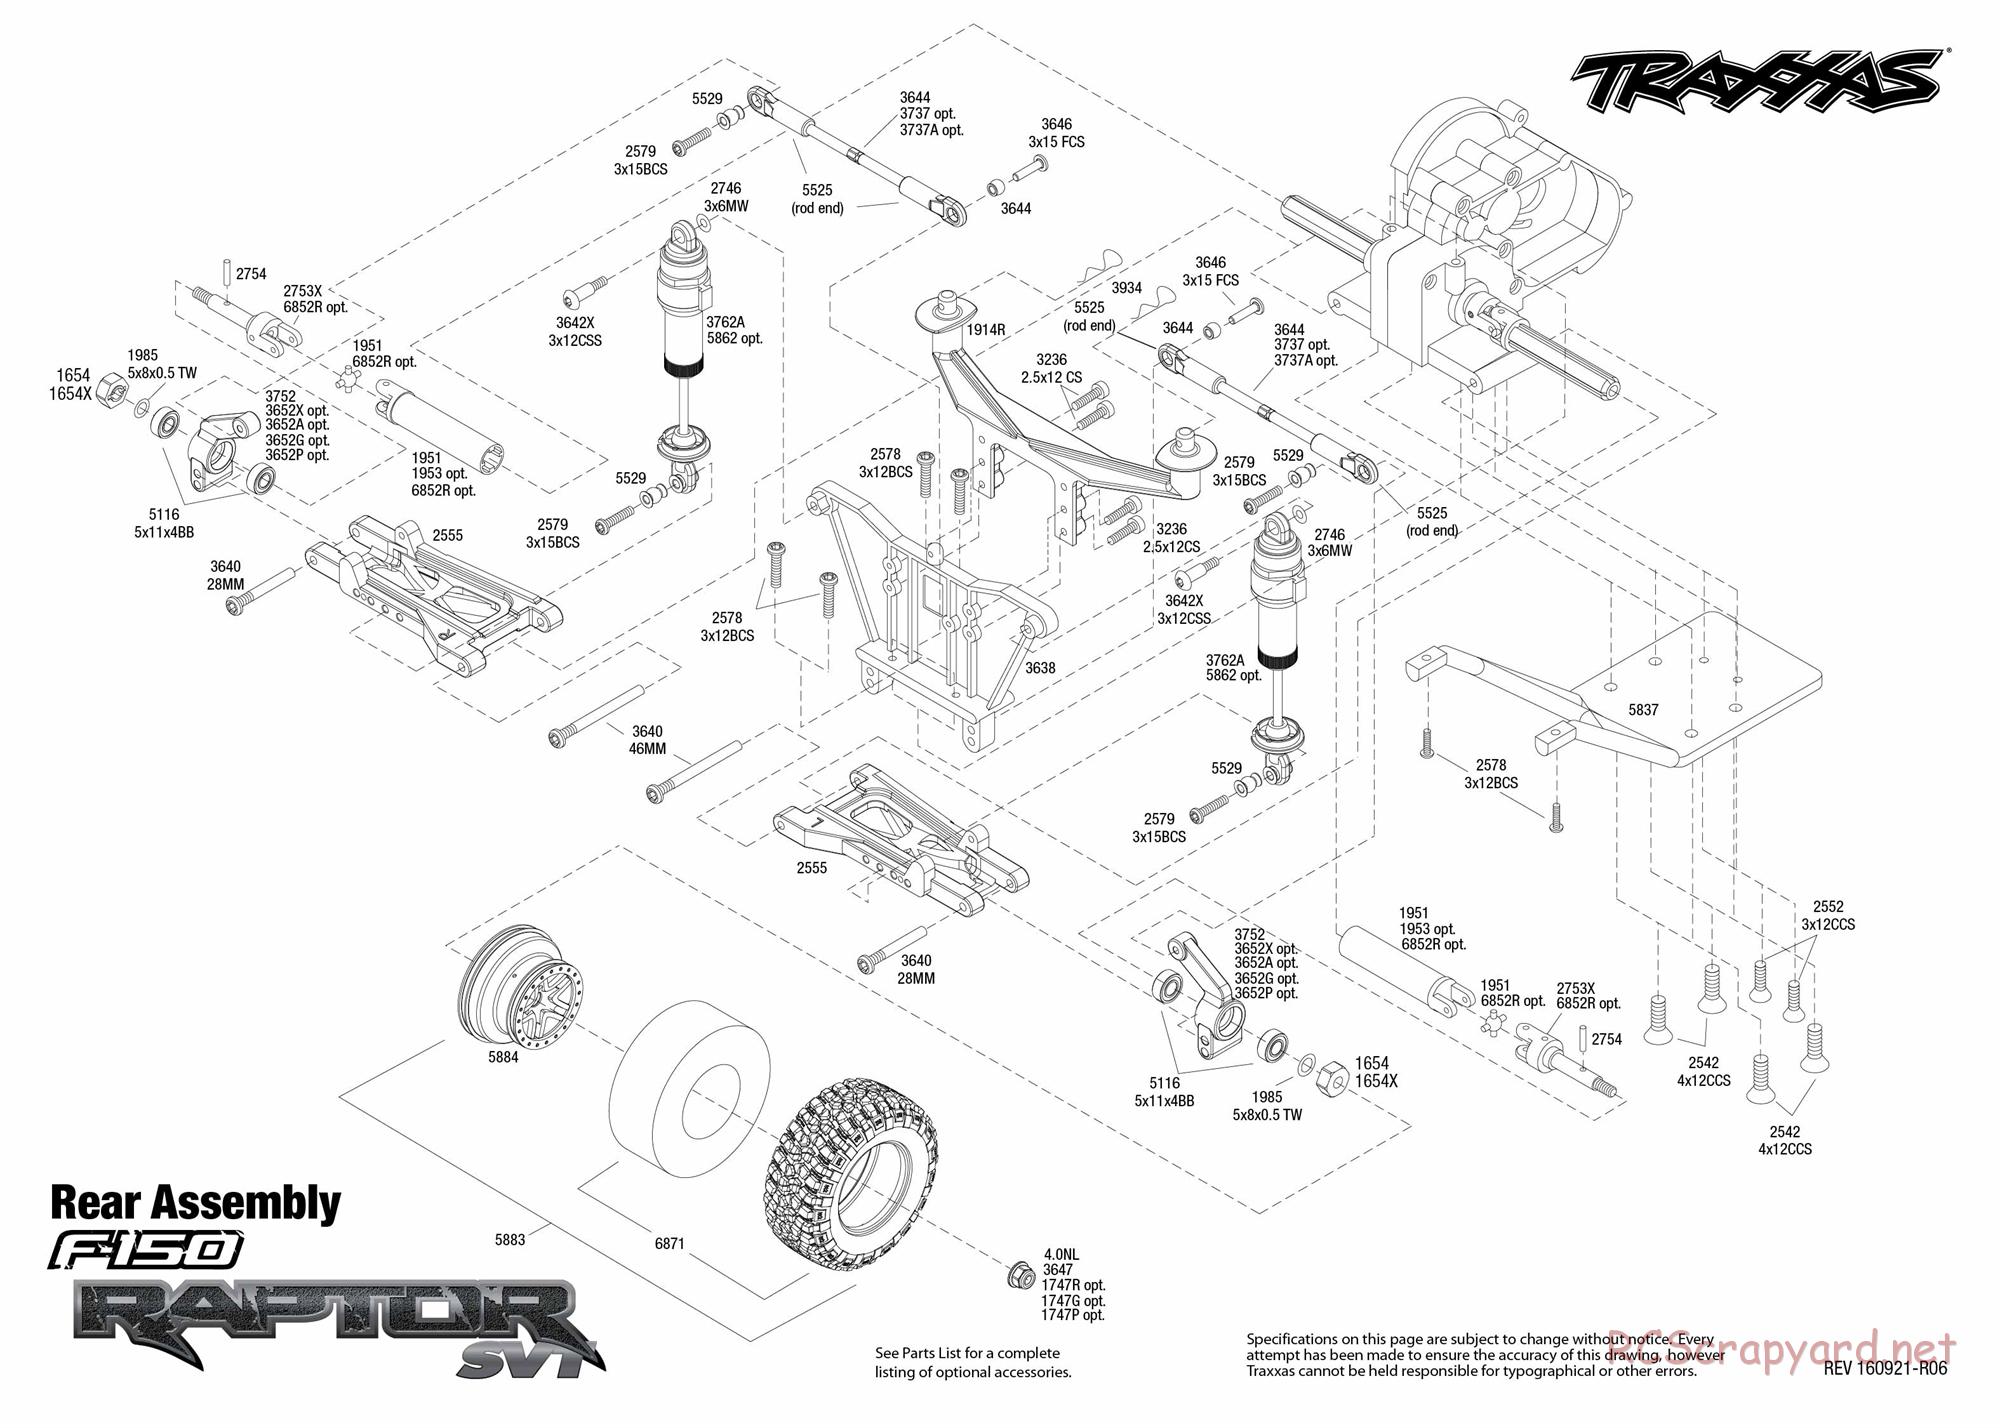 Traxxas - Ford F-150 SVT Raptor OBA (2015) - Exploded Views - Page 3